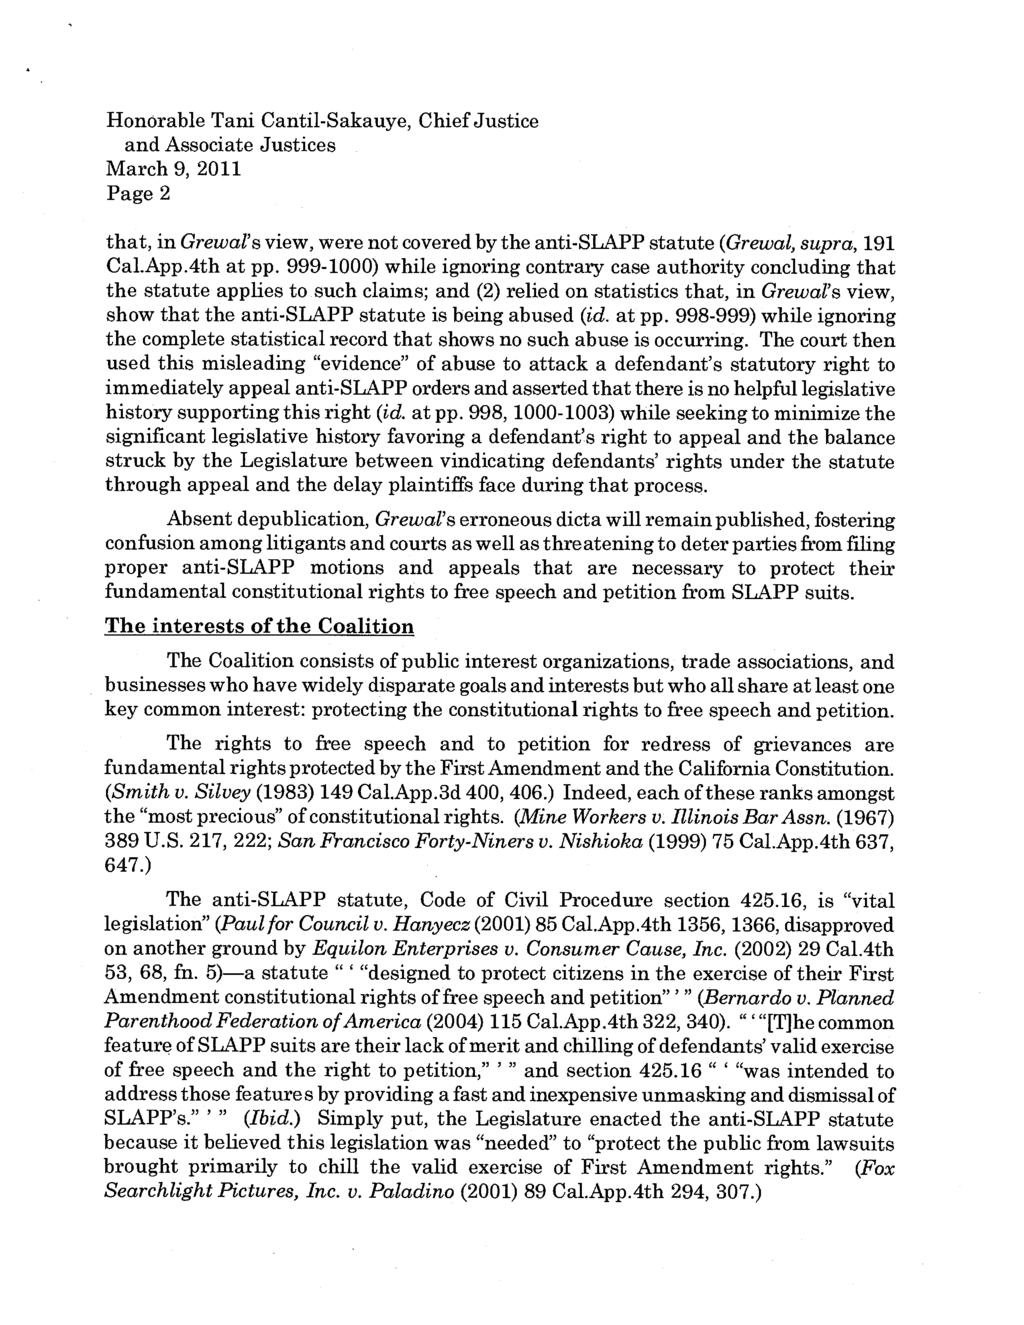 Page 2 that, in Grewal's view, were not covered by the anti-slapp statute (Grewal,.supra, 191 Cal.App.4th at pp.